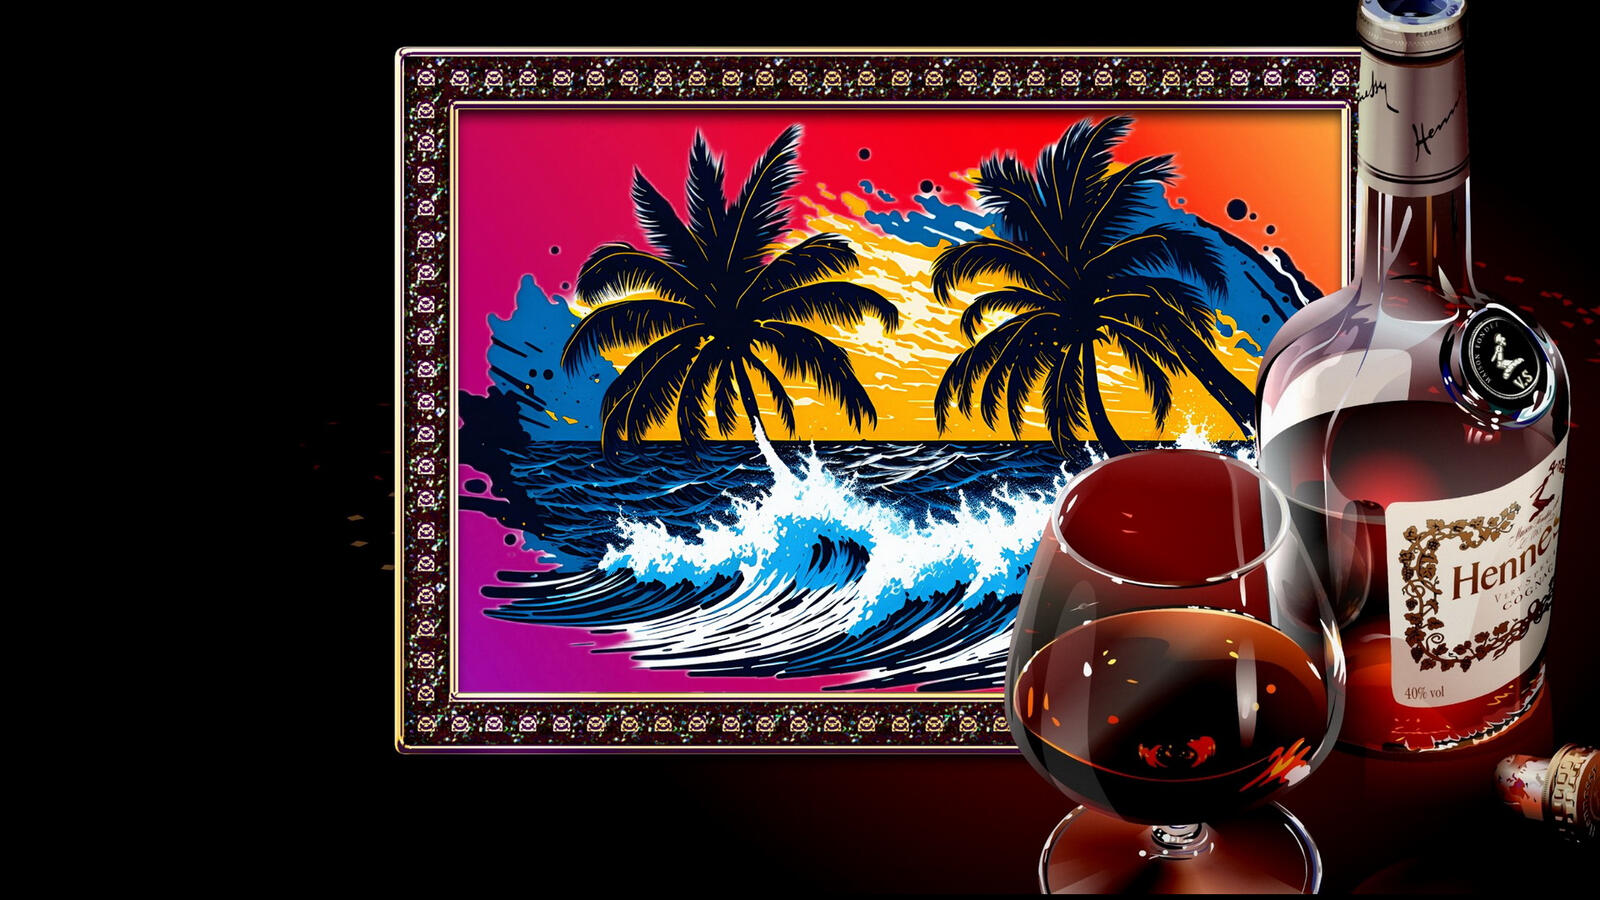 Free photo A bottle of Hennessy with a glass of cognac and a painting with palm trees on a dark background